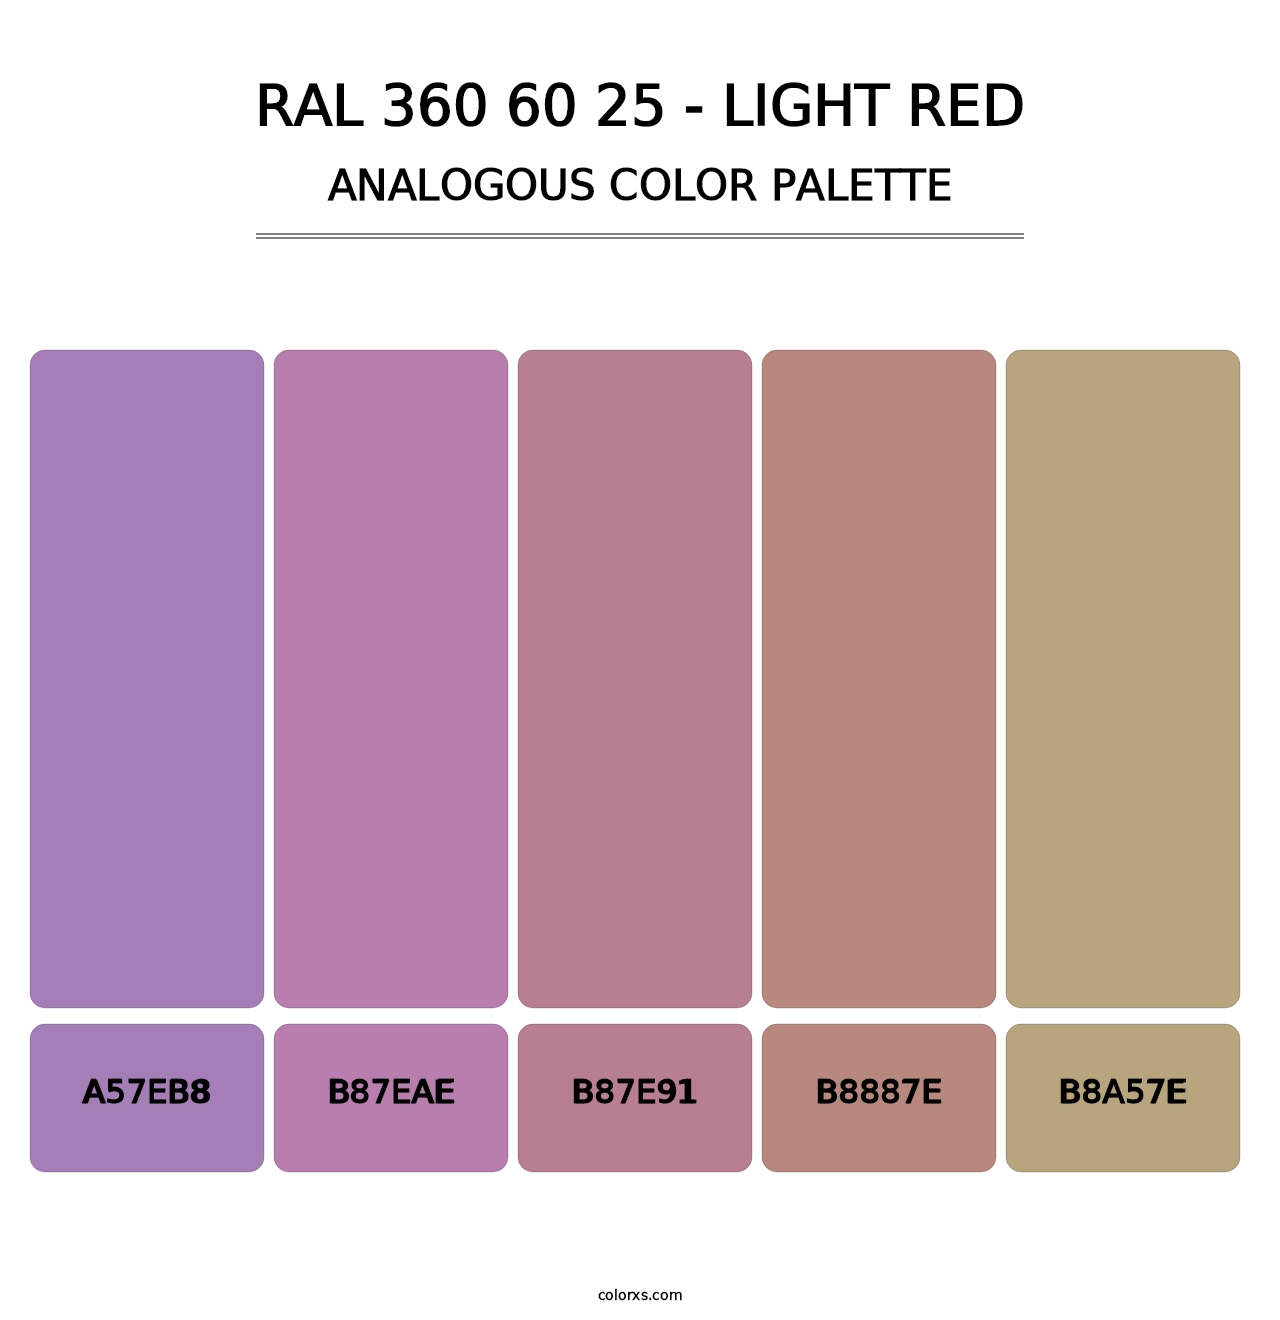 RAL 360 60 25 - Light Red - Analogous Color Palette